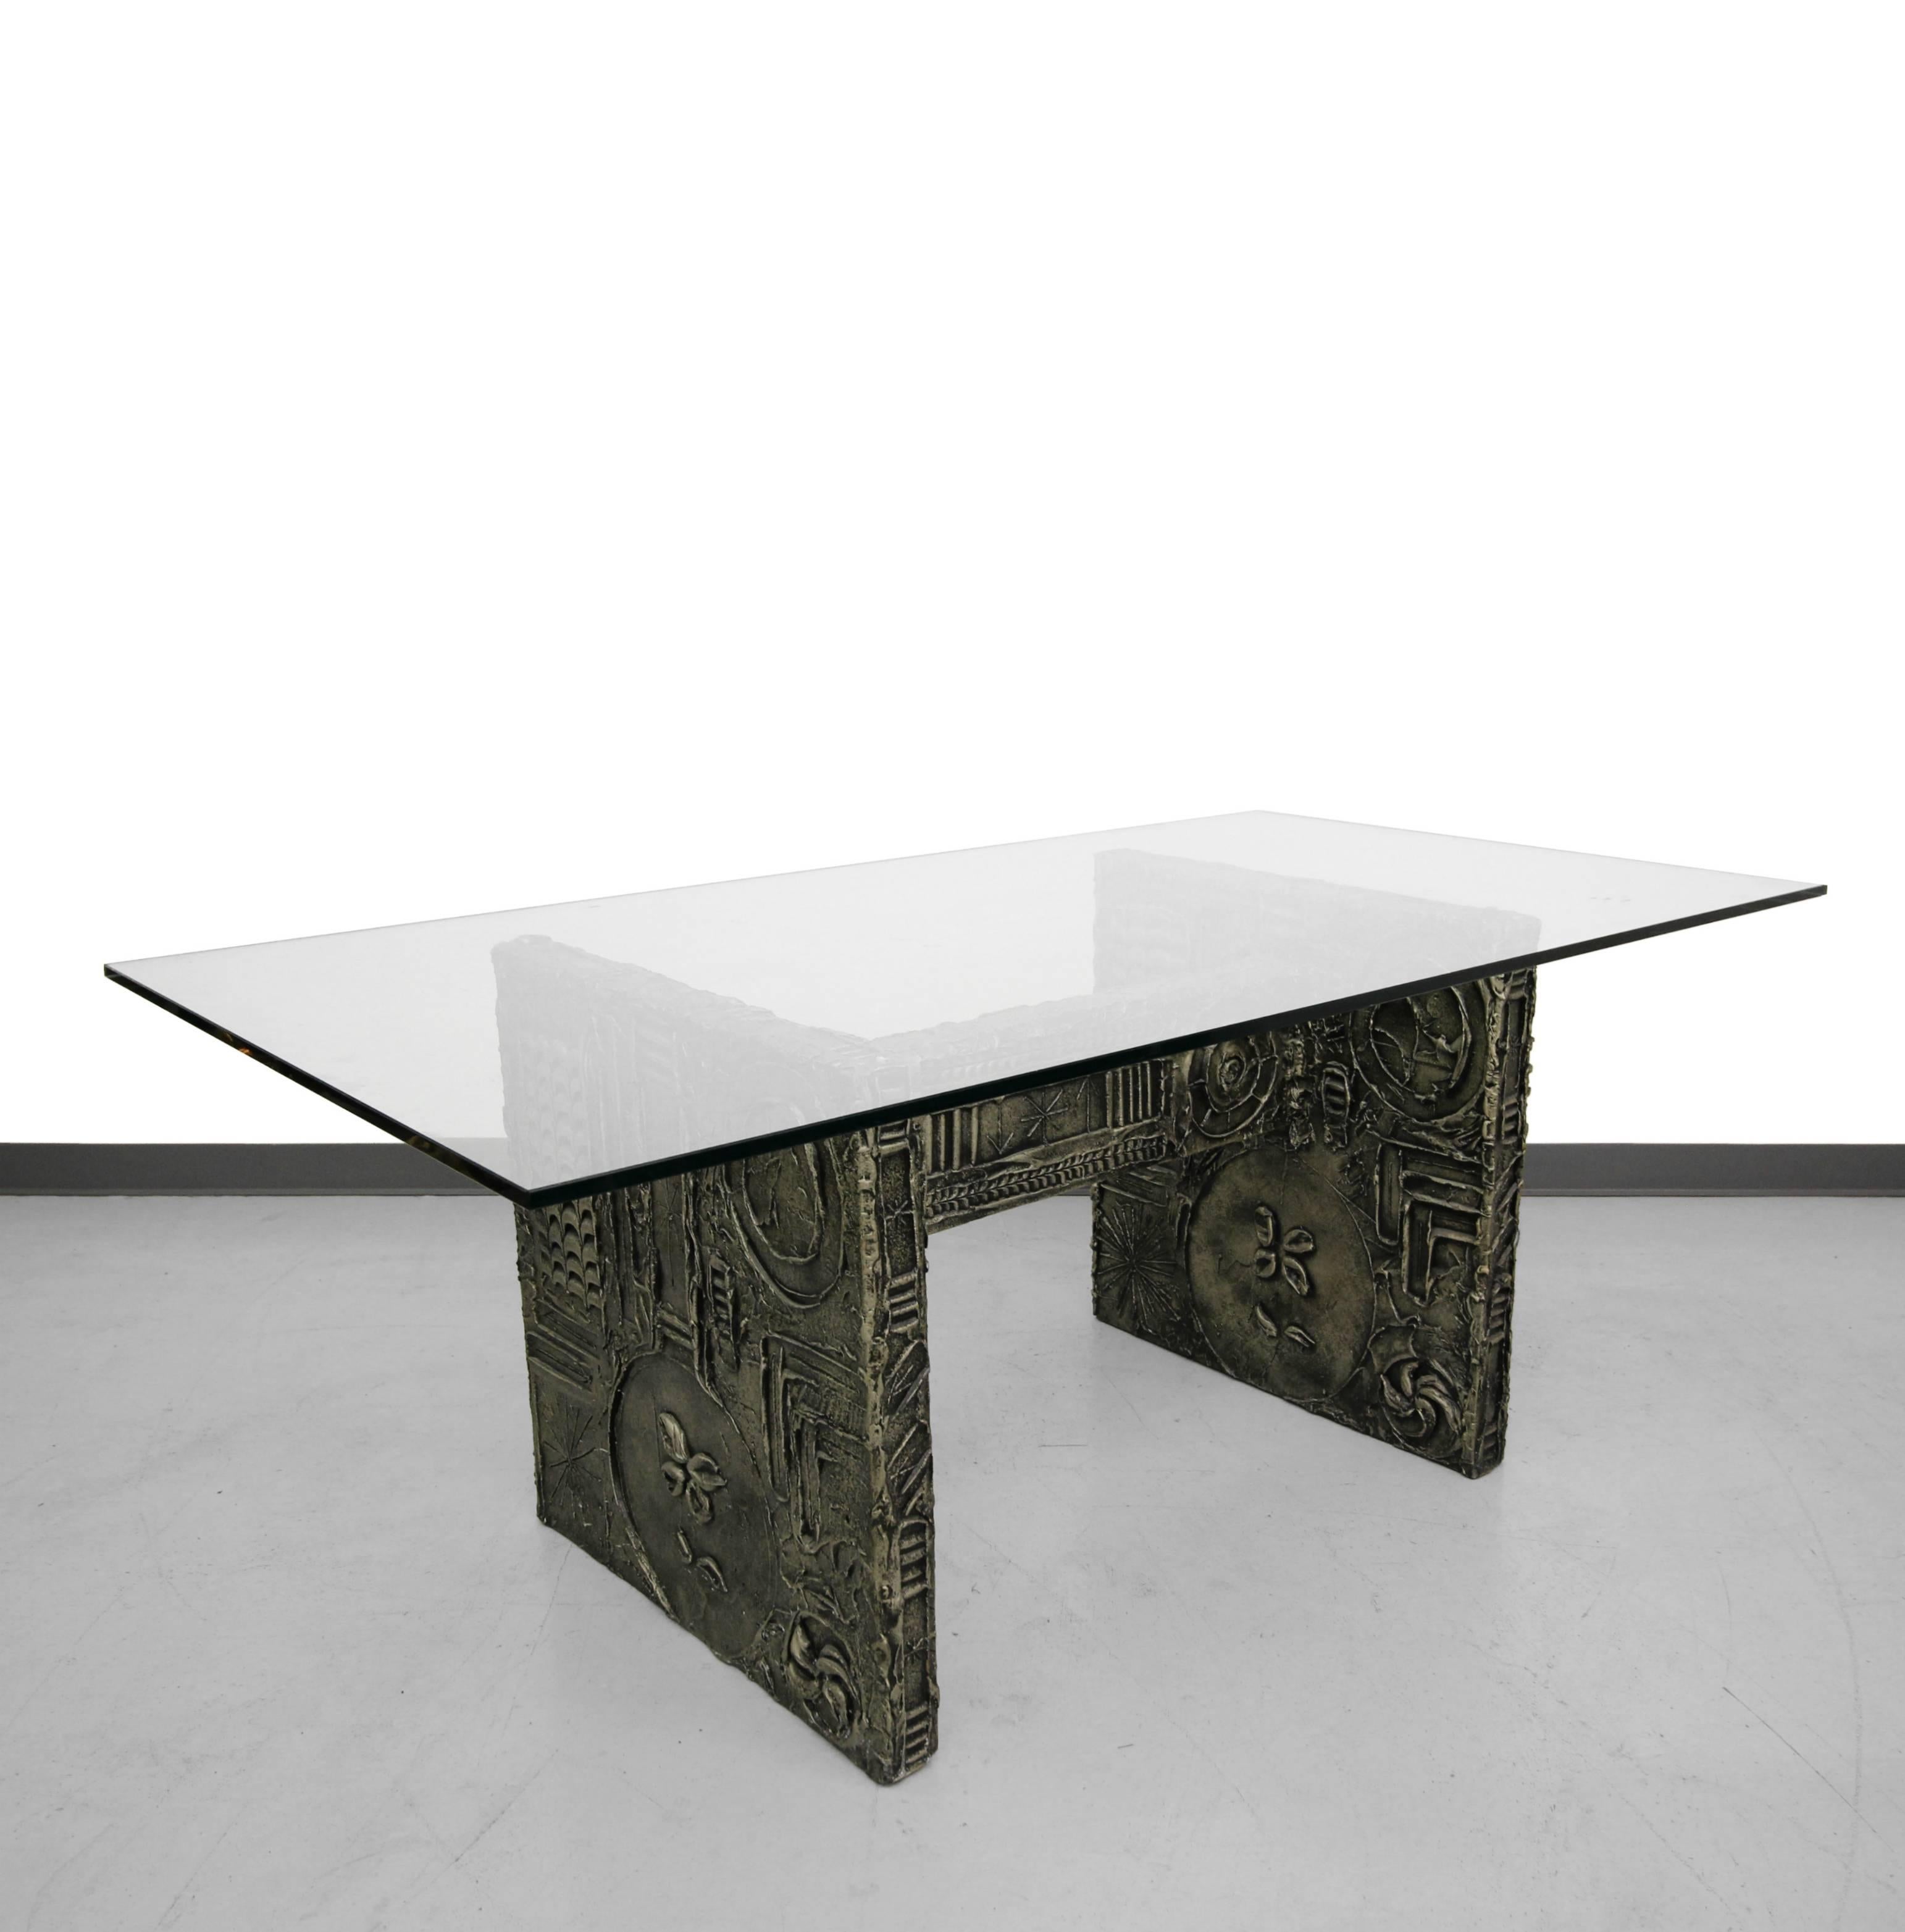 Mid-Century Brutalist style dining table by Adrian Pearsall for Craft Associates. Fasioned after the great work of Paul Evans, the table features a detailed resin finish over a wood base.

Base measures 29